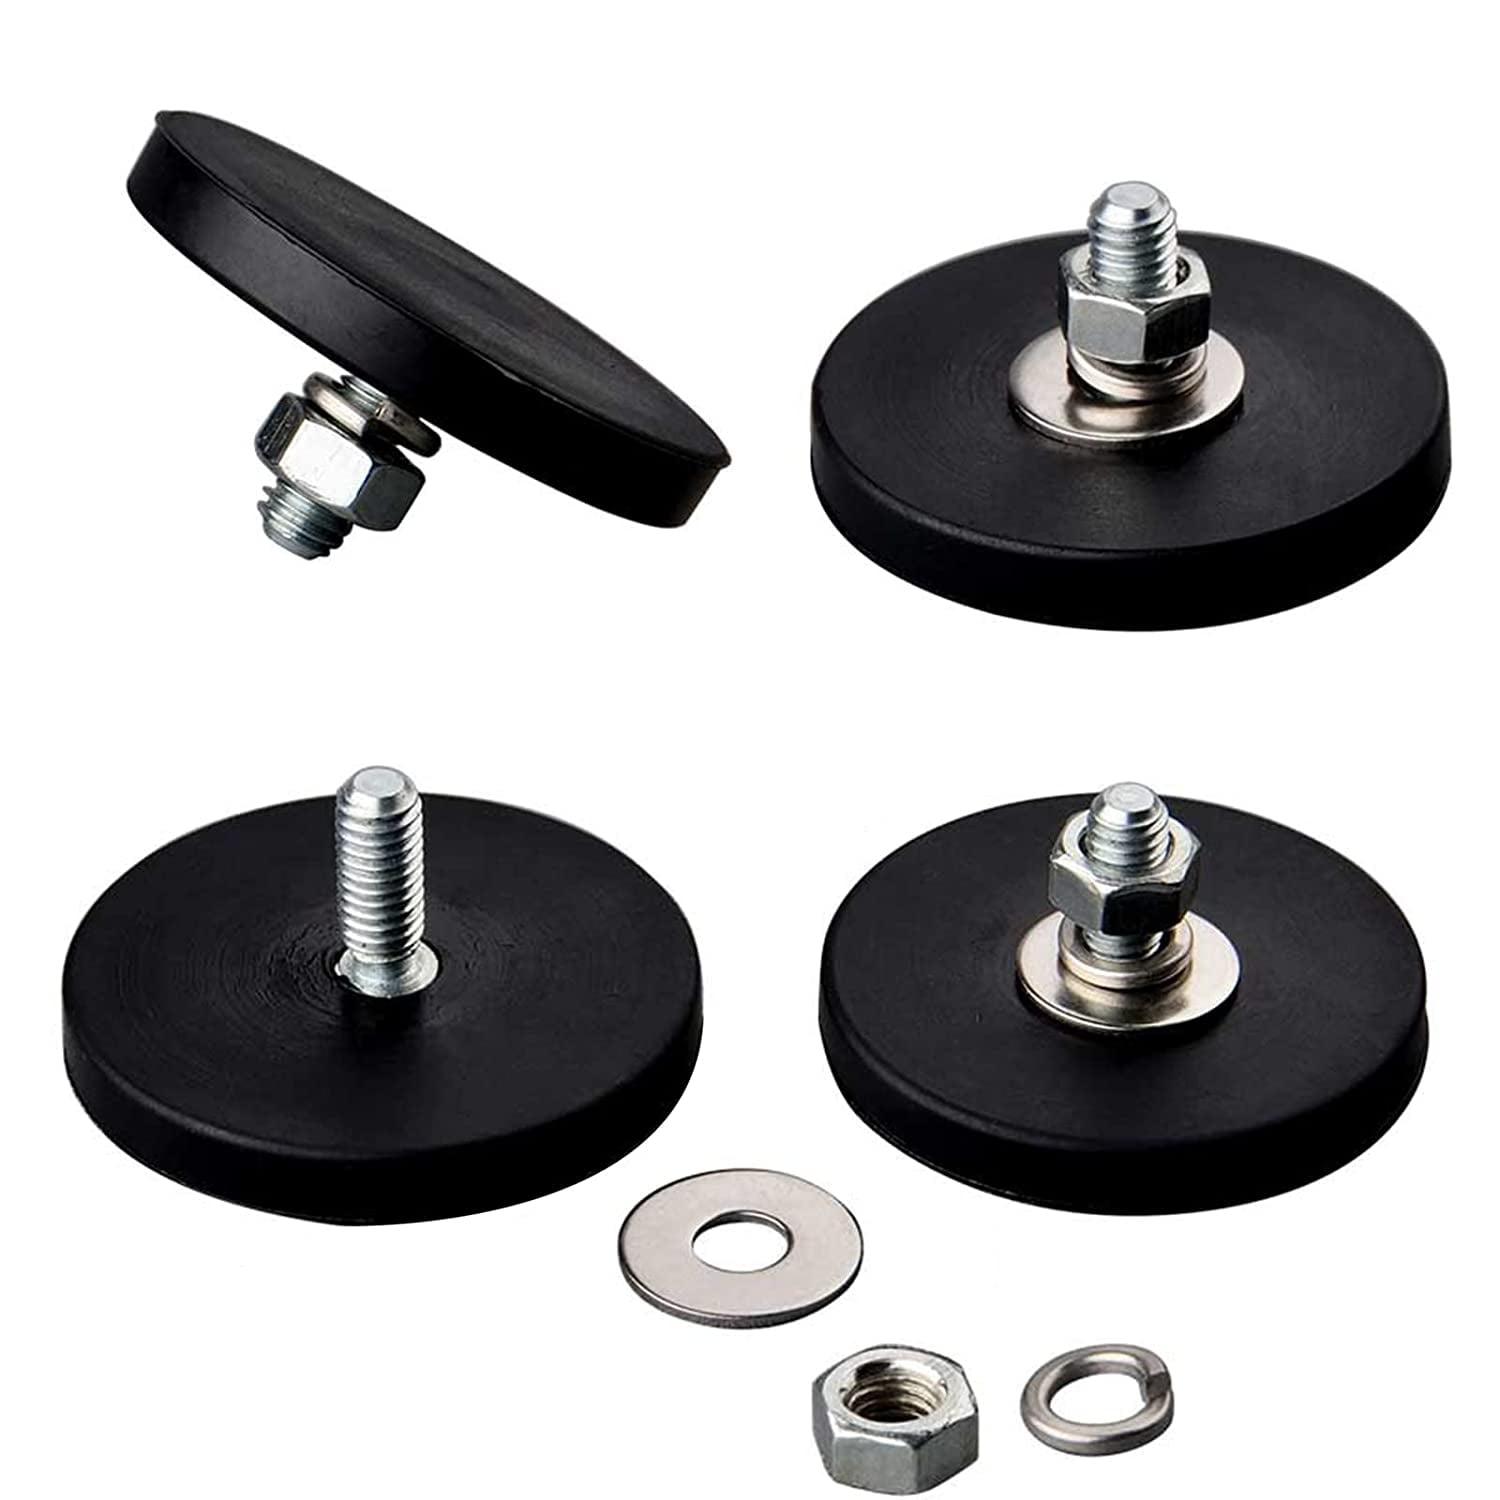 24LB Rubber Magnets Male Thread for Mounting Led Lighting, Holding Tools - Walmart.com